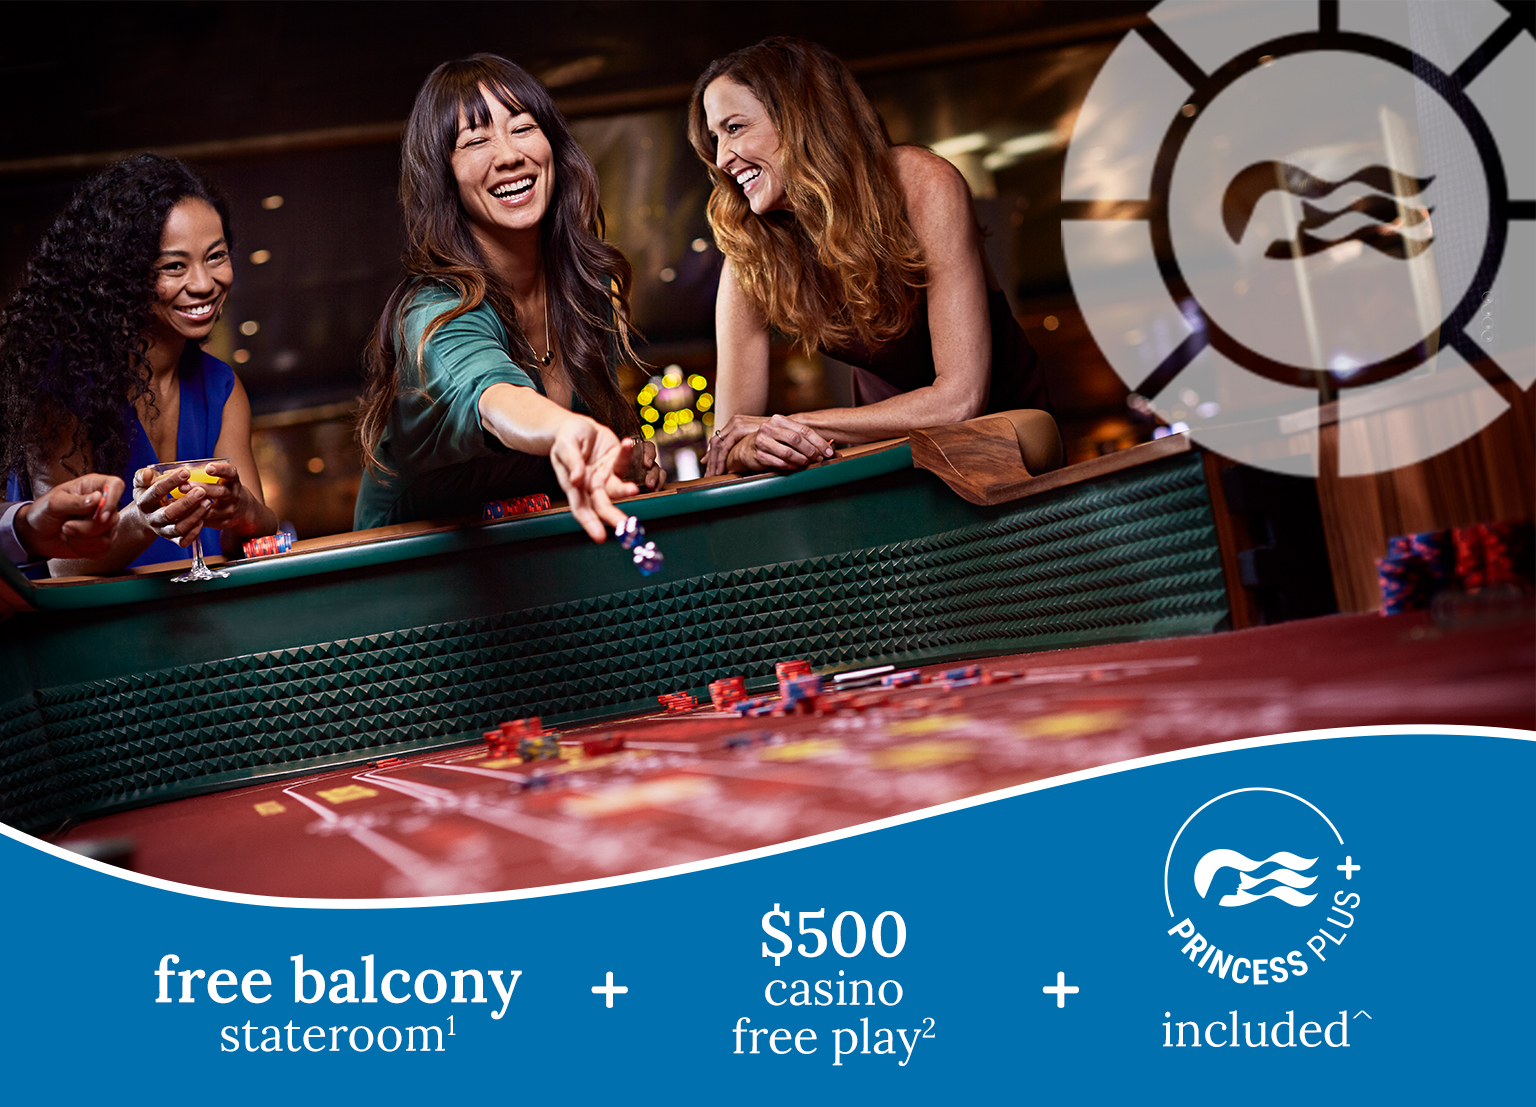 Three women laugh while playing at a craps table - free balcony stateroom1 + $500 casino free play2 + princess plus included^